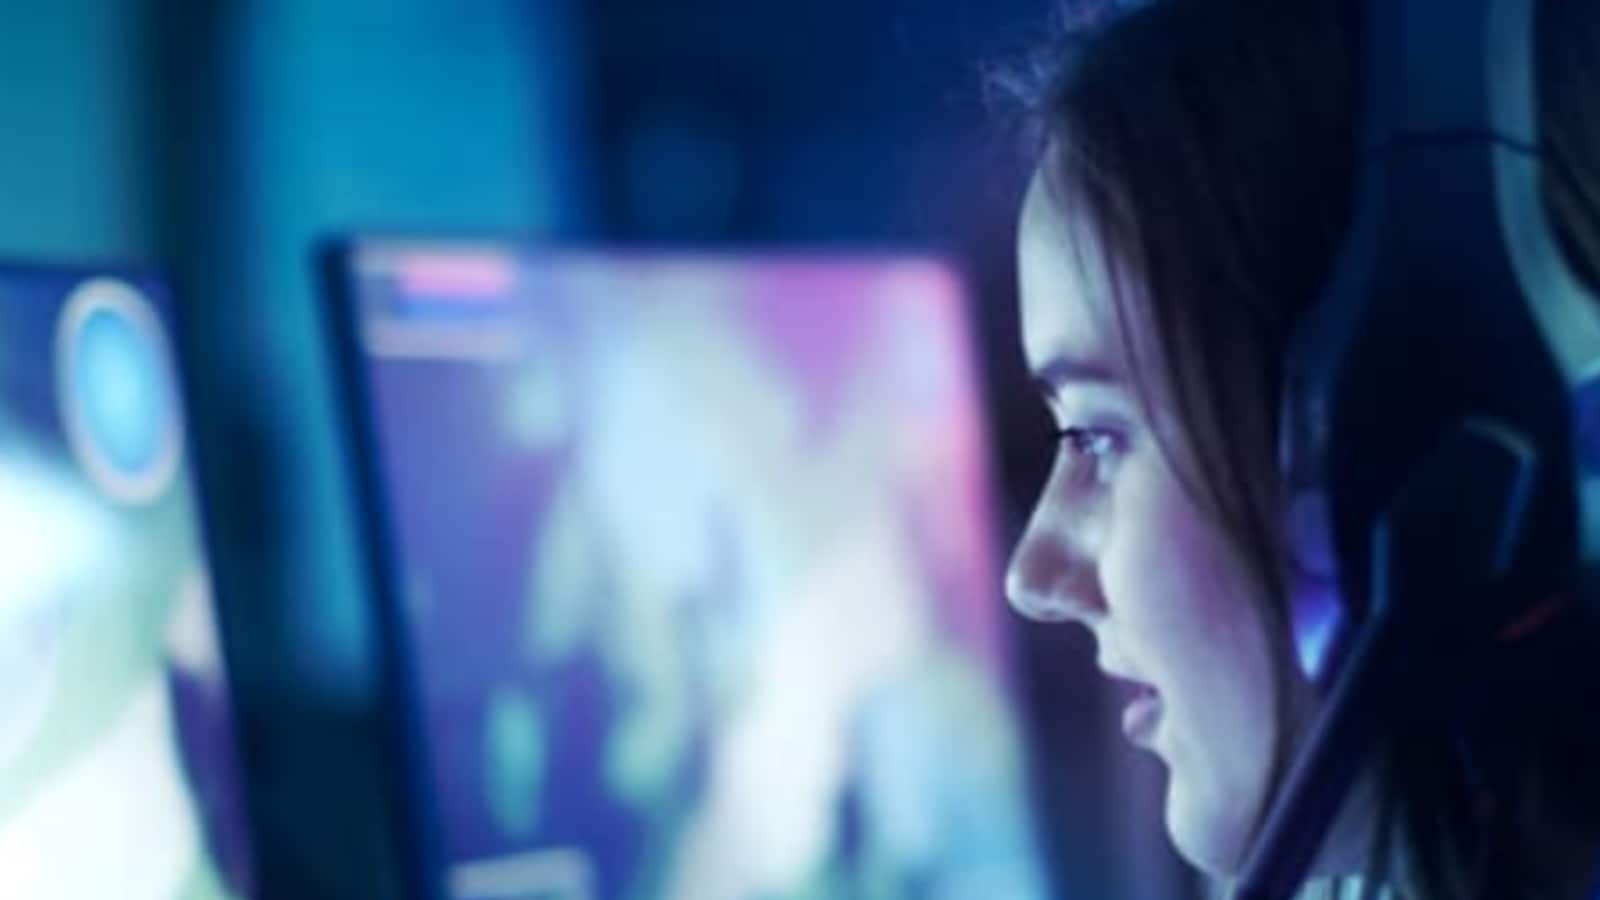 How the Mental Health of Video Game Players Can Be Protected